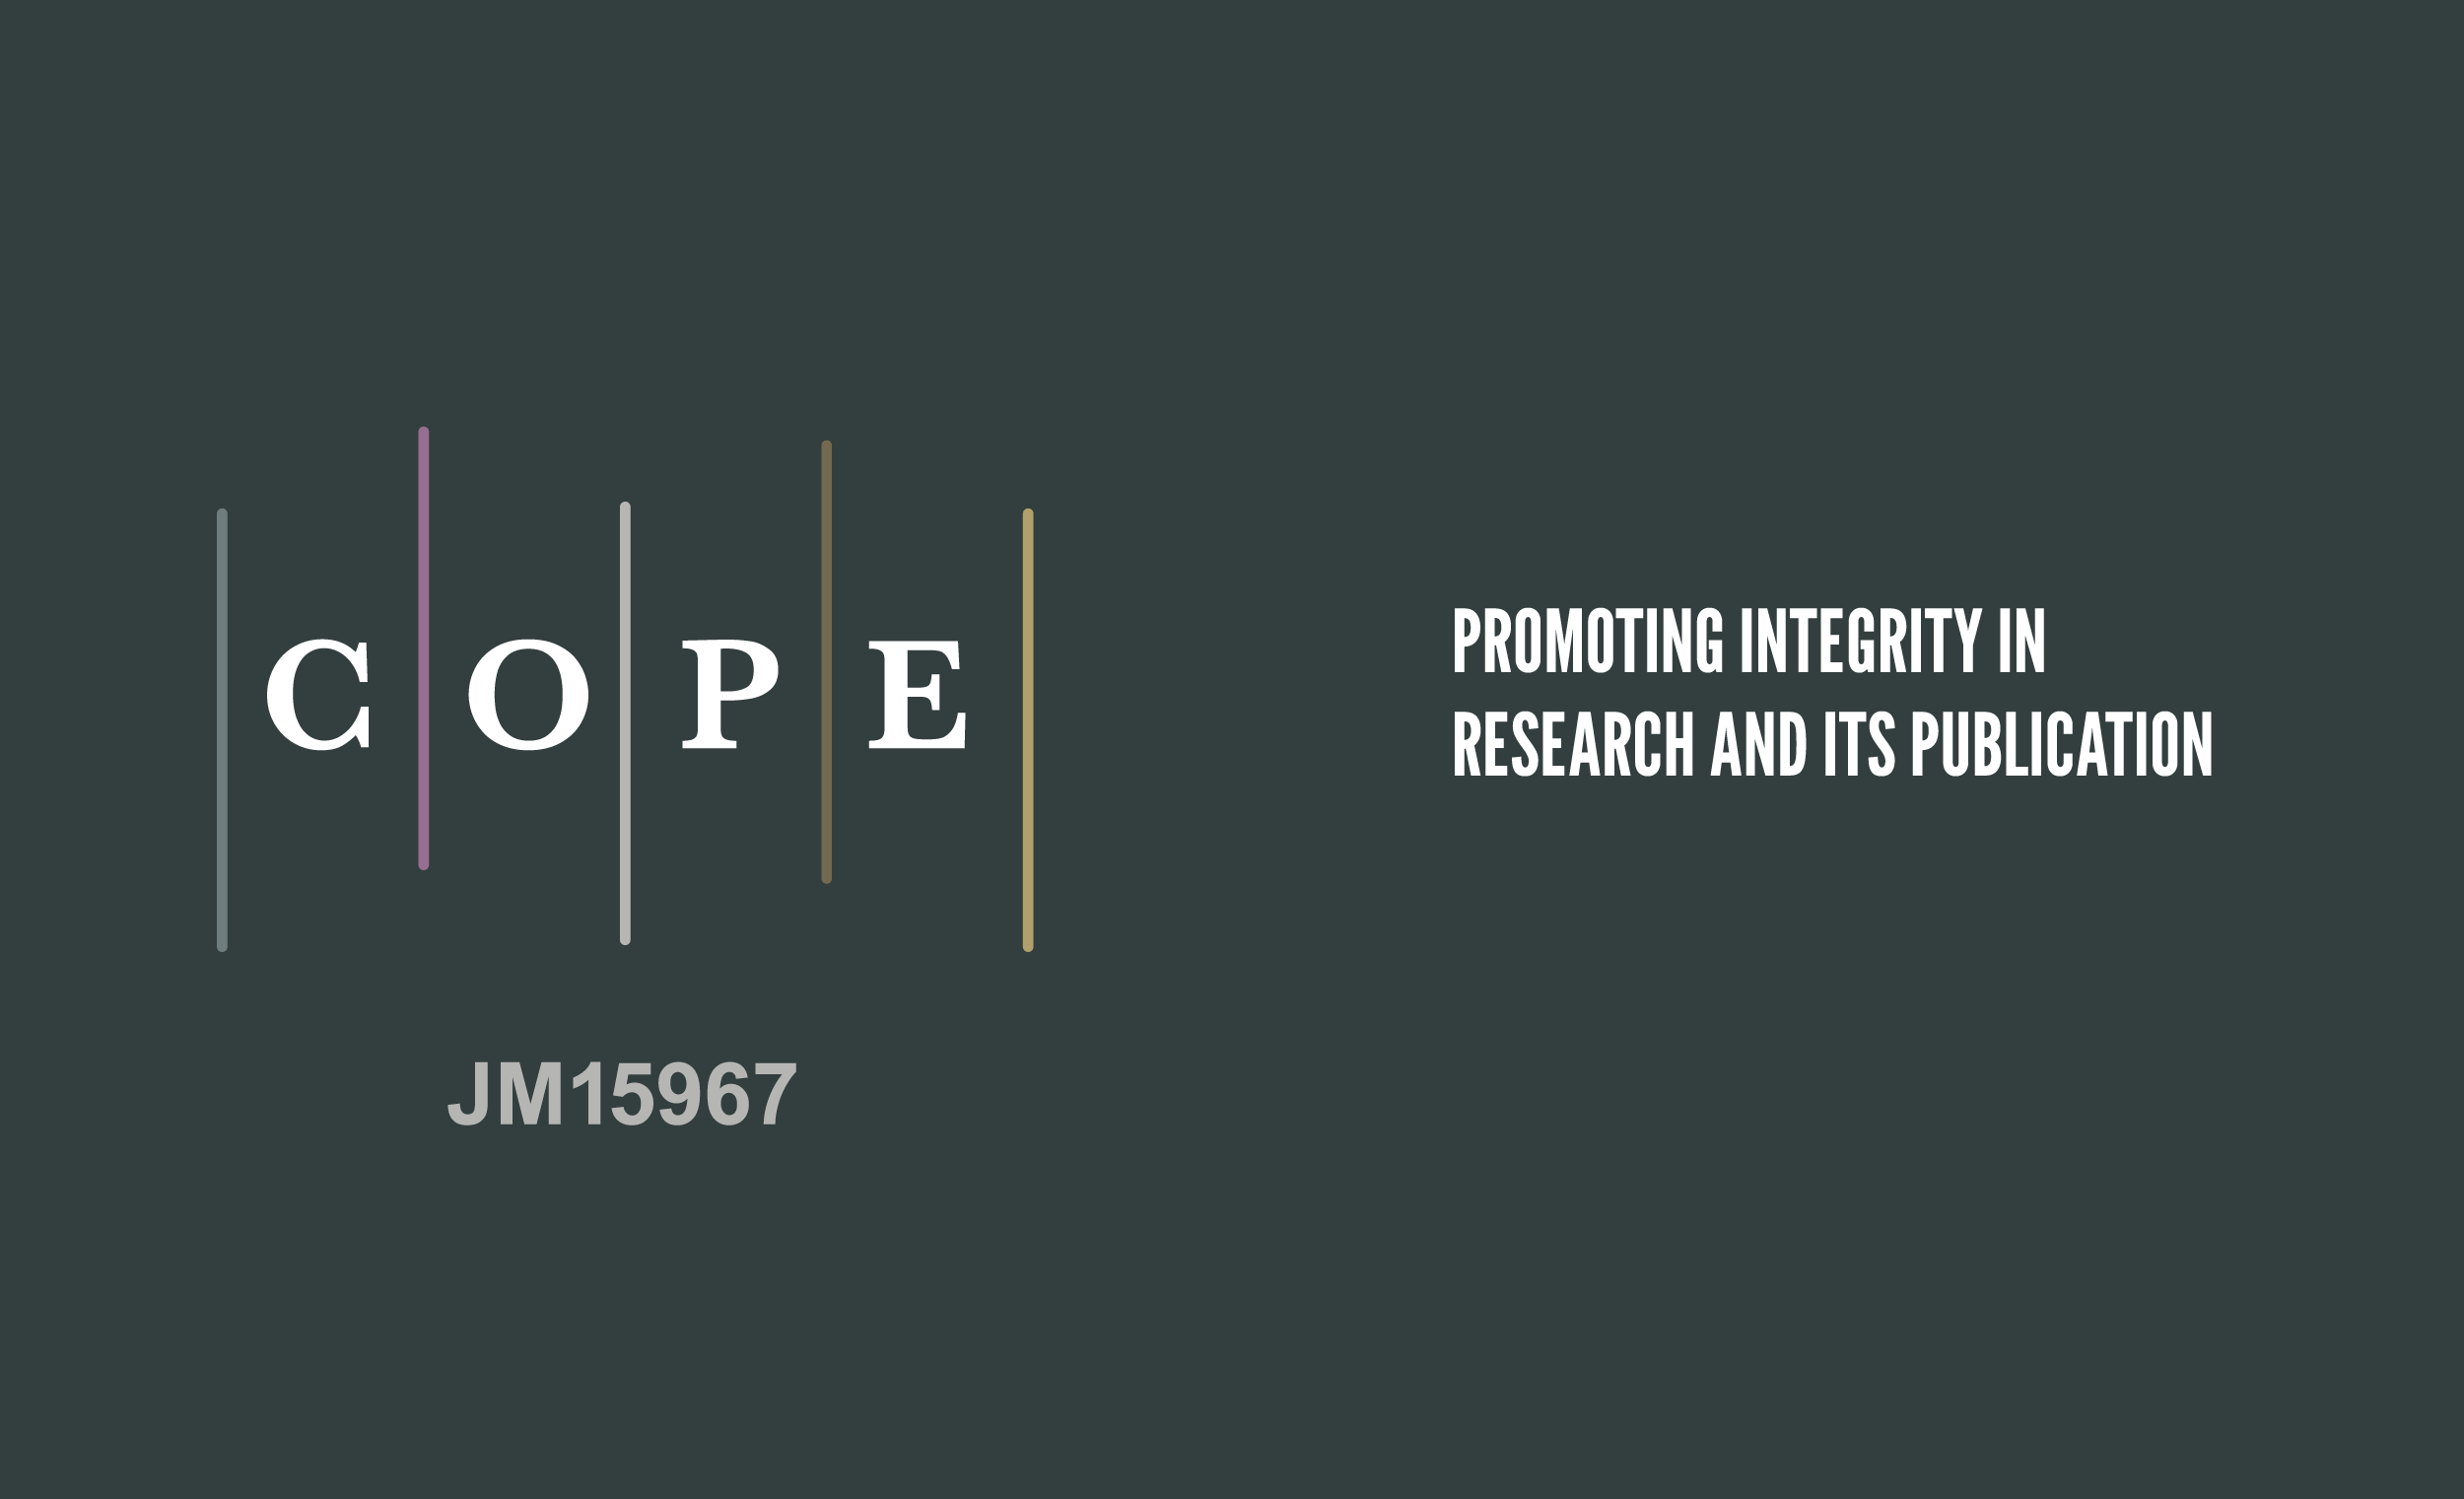 COPE, promoting integrity in research and its publication